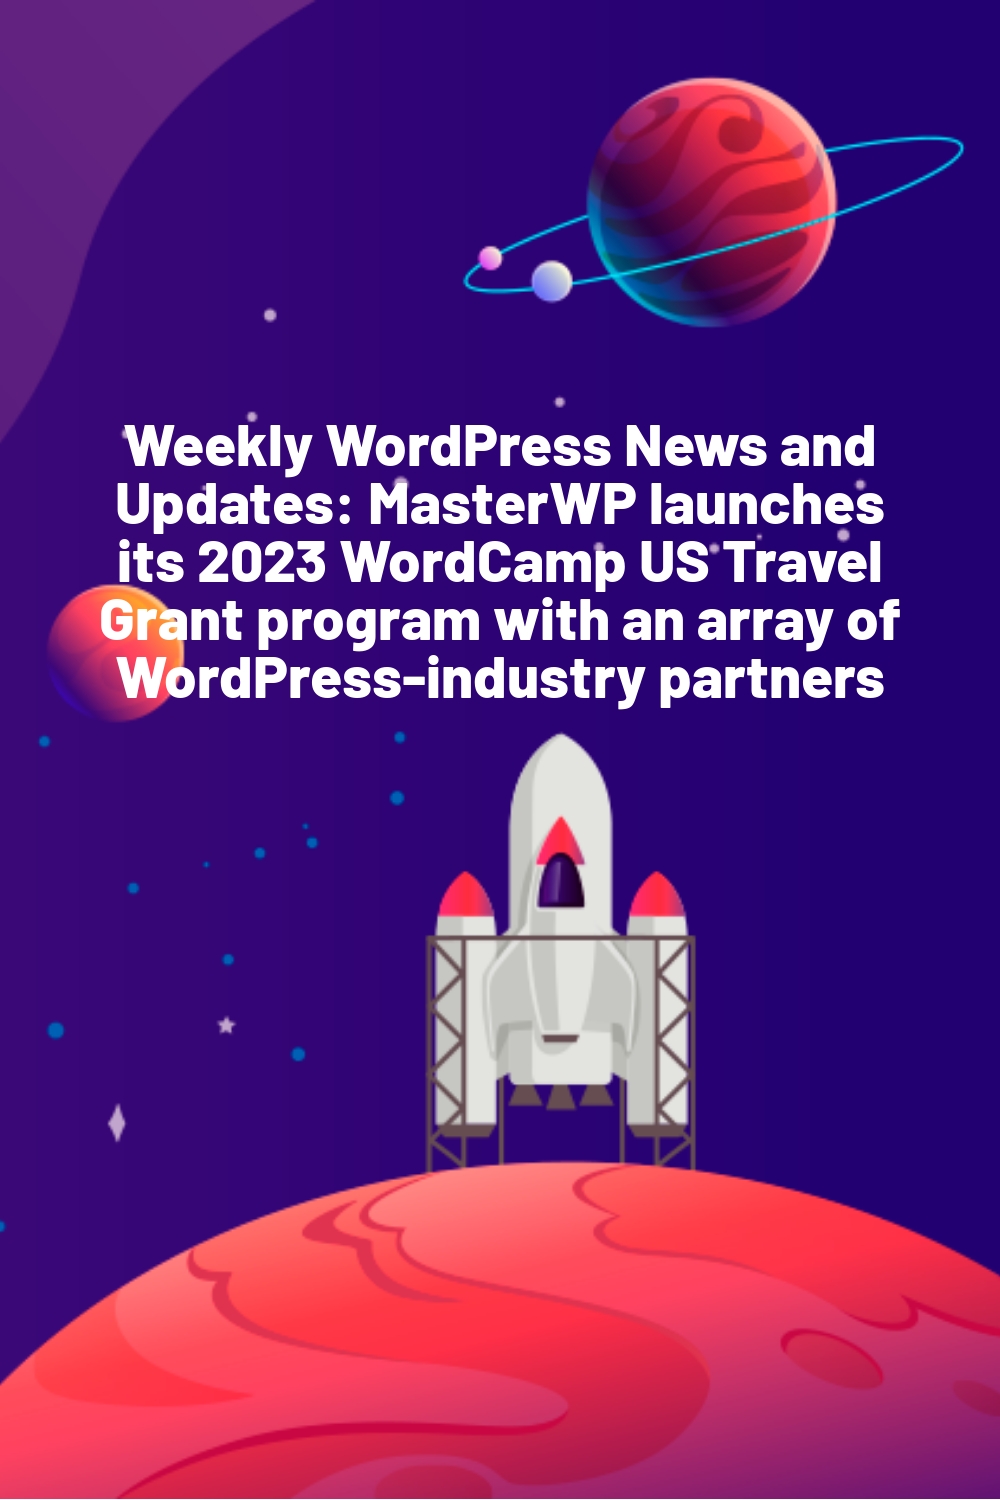 Weekly WordPress News and Updates: MasterWP launches its 2023 WordCamp US Travel Grant program with an array of WordPress-industry partners